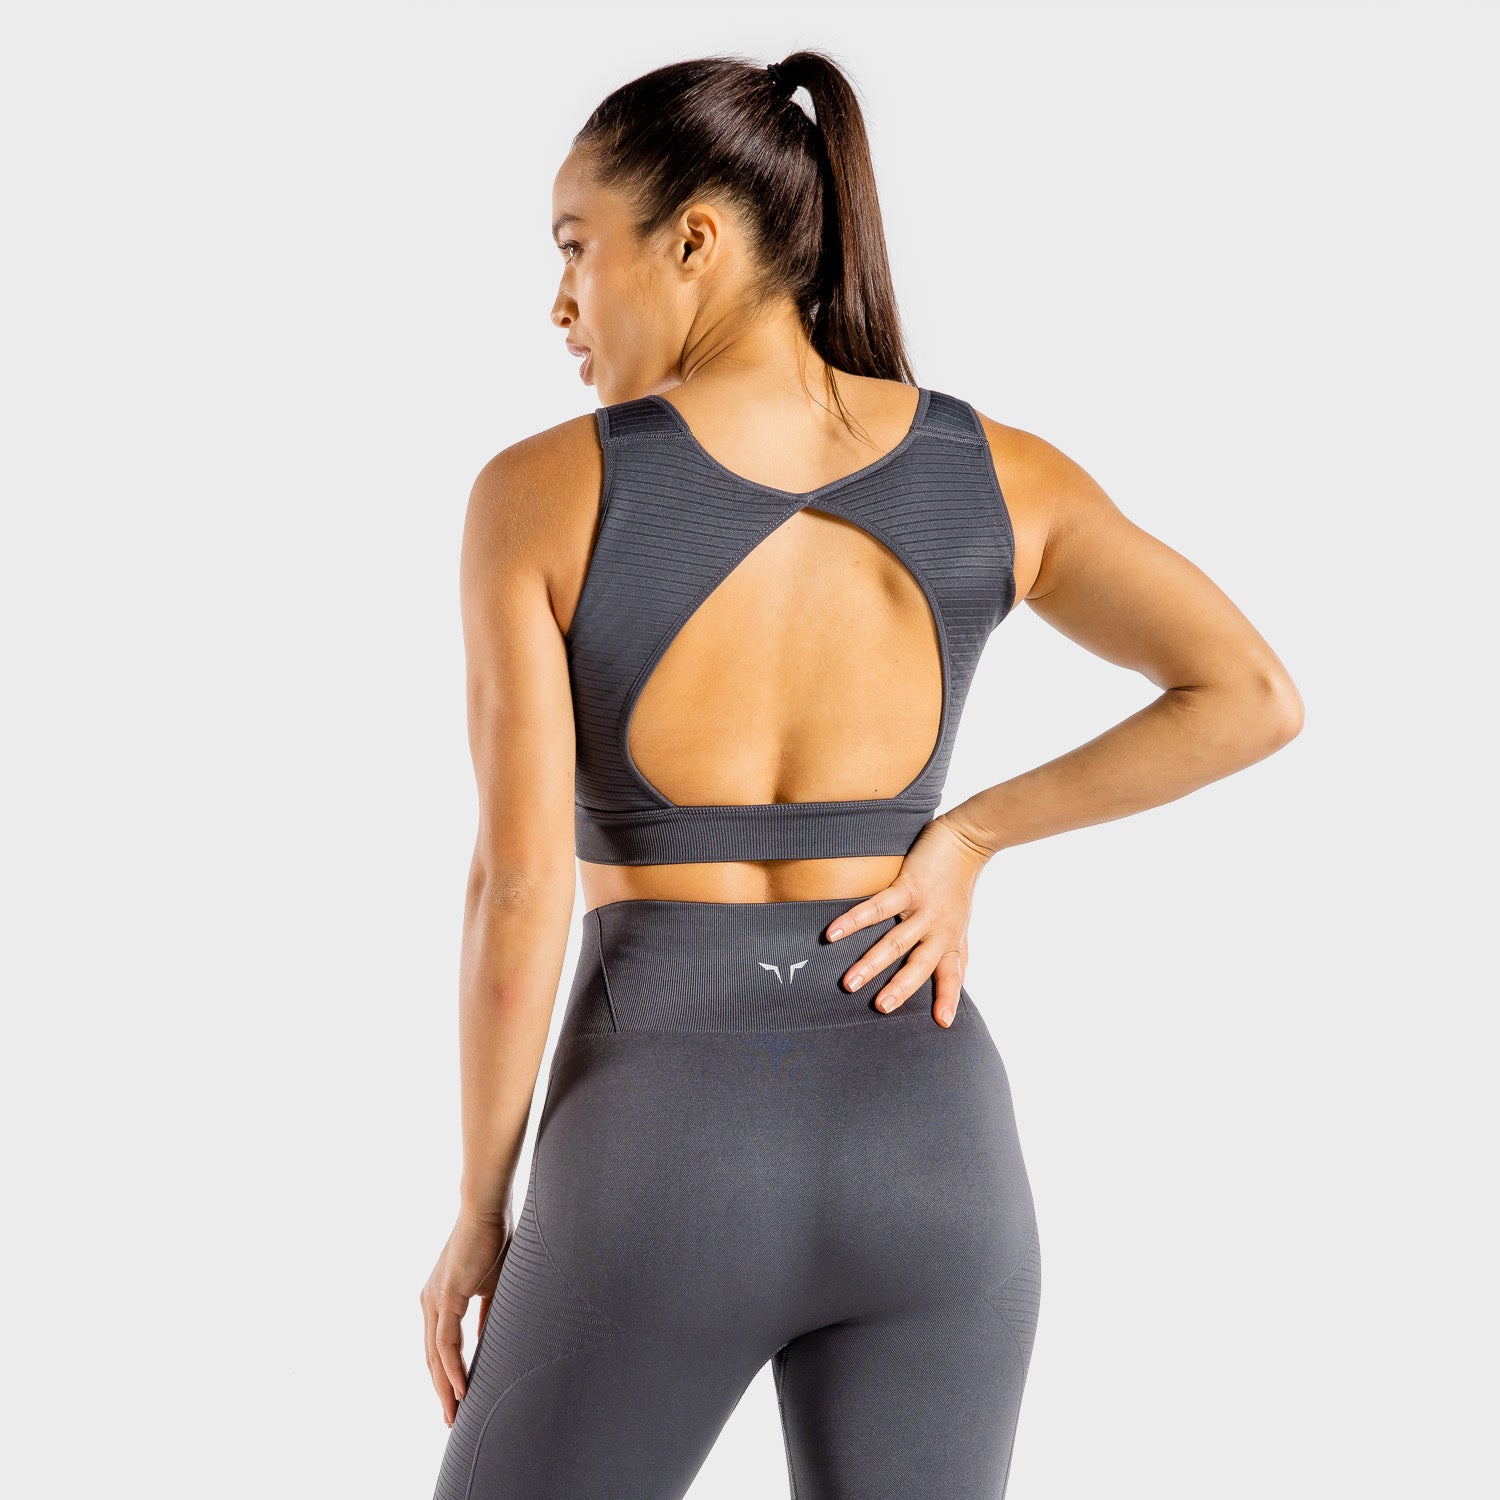 squatwolf-sports-bra-for-gym-meta-sports-bra-charcoal-workout-clothes